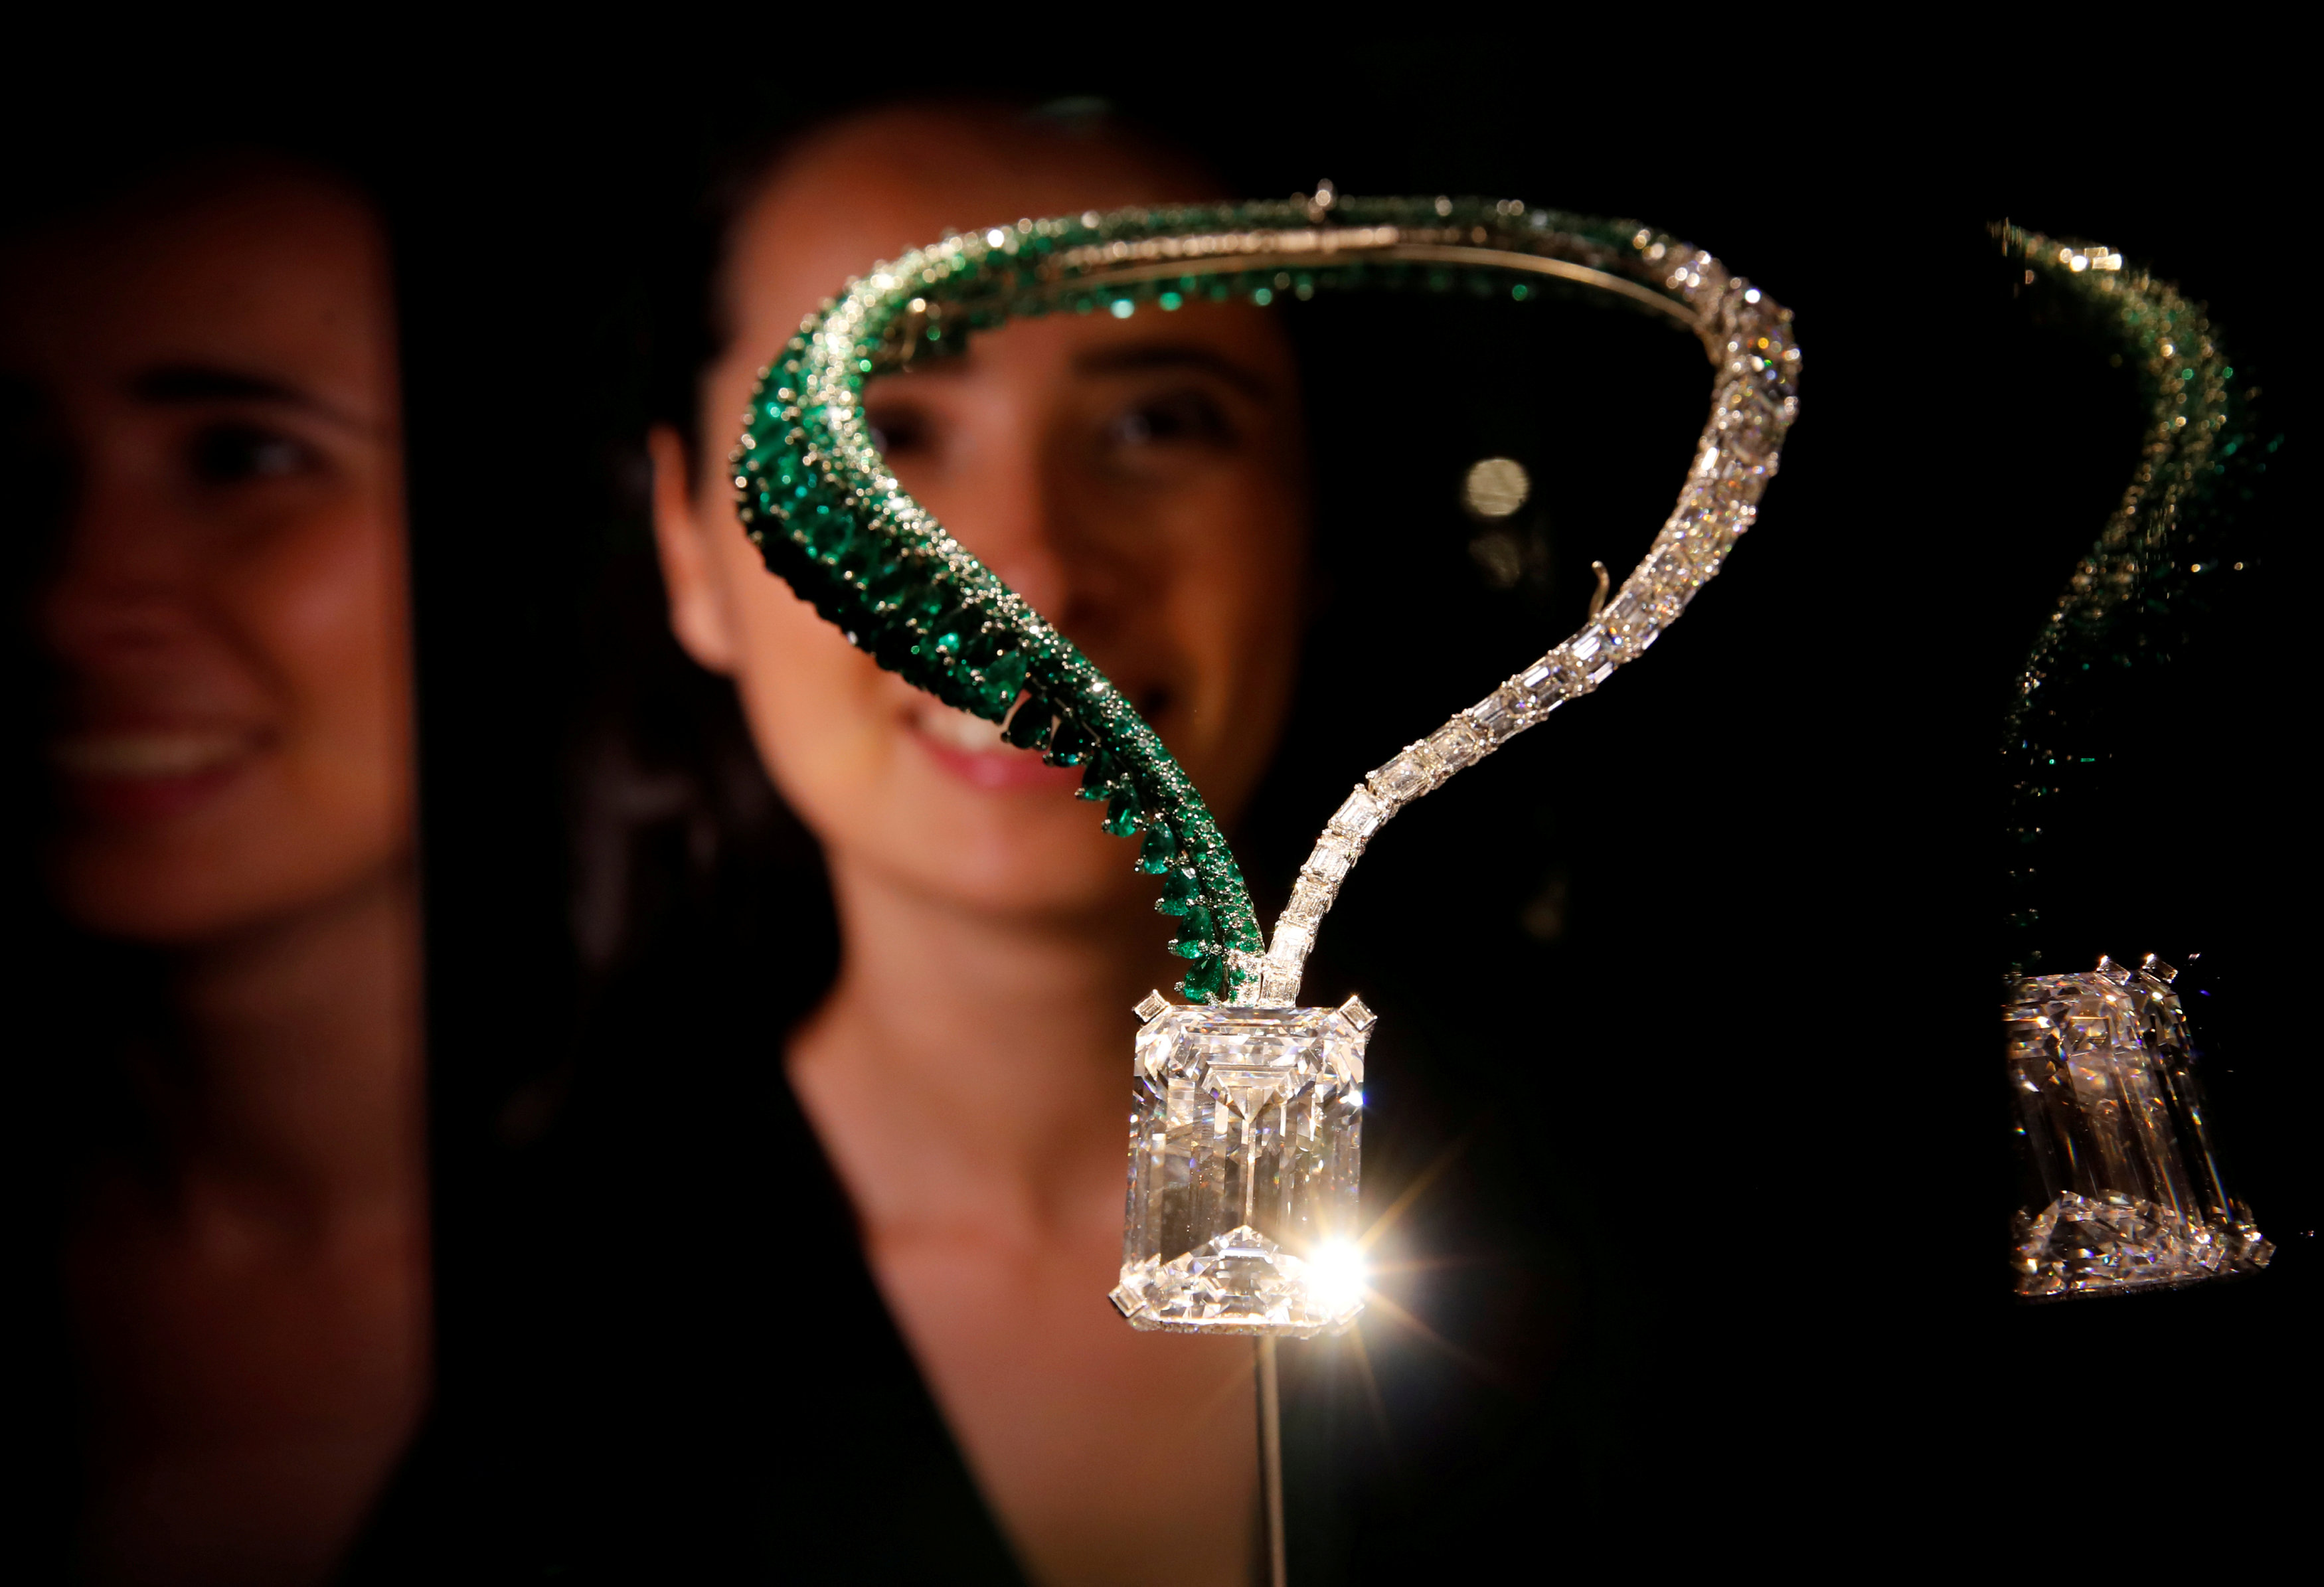 Necklace with largest flawless white diamond sold for record $34 million at auction